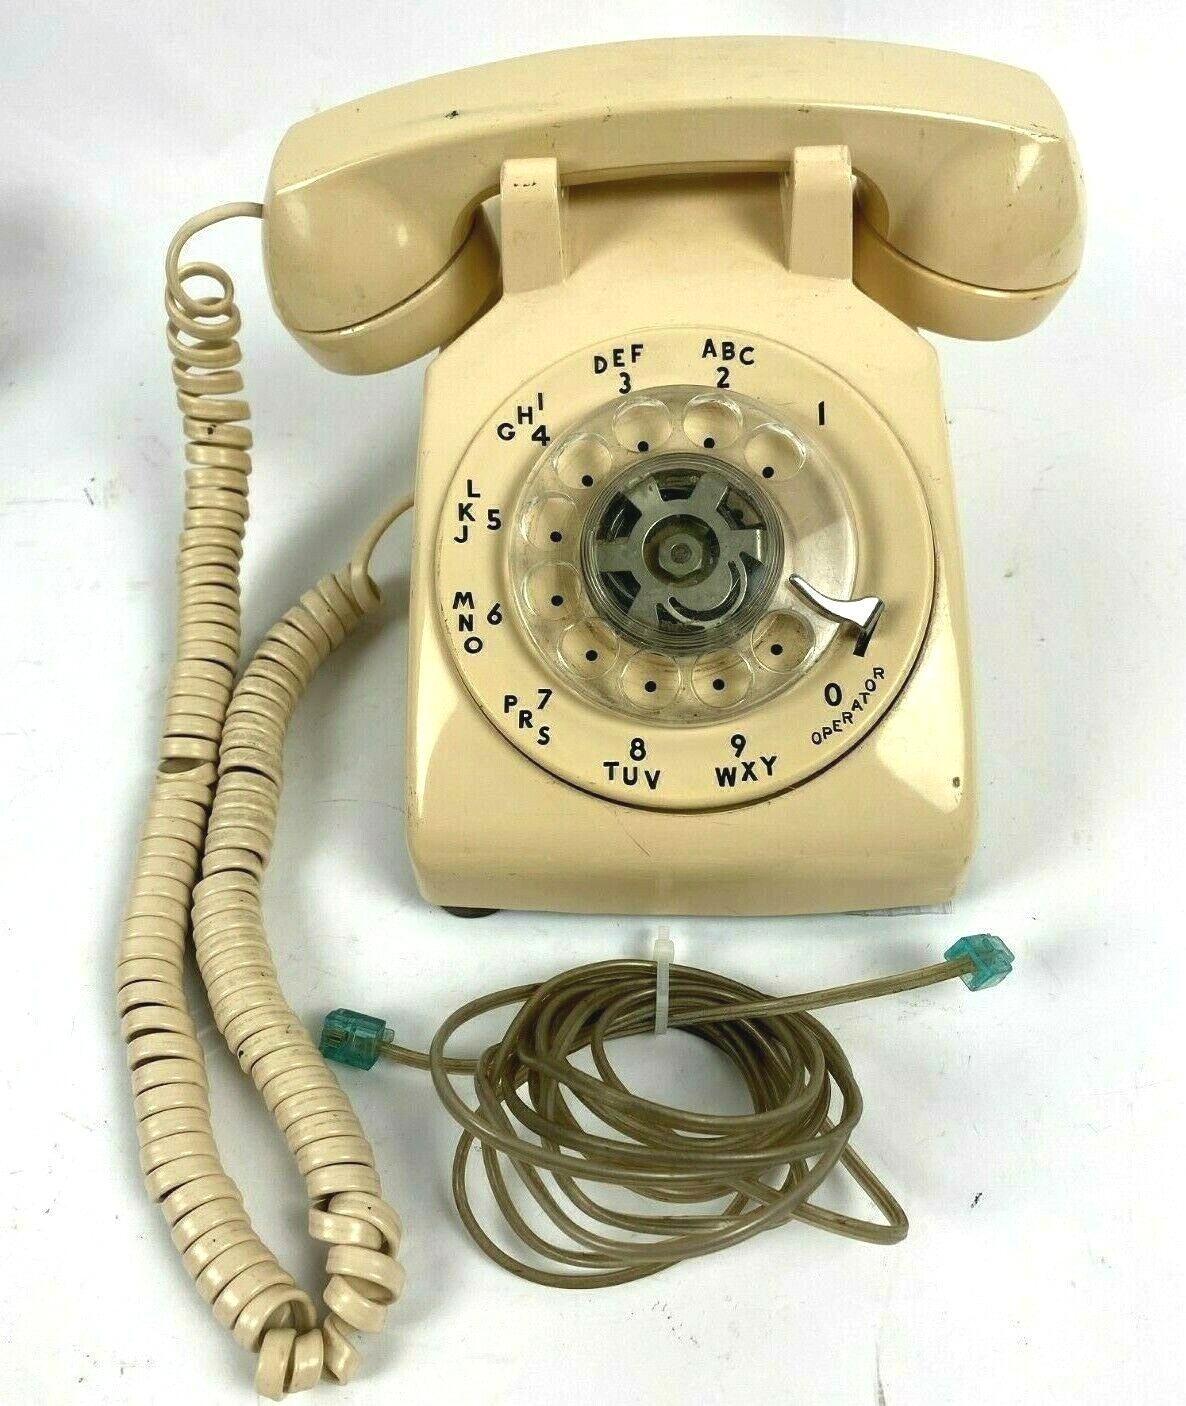 Western Electric Rotary Dial Phone Telephone Bell System w/ Cord  Vintage